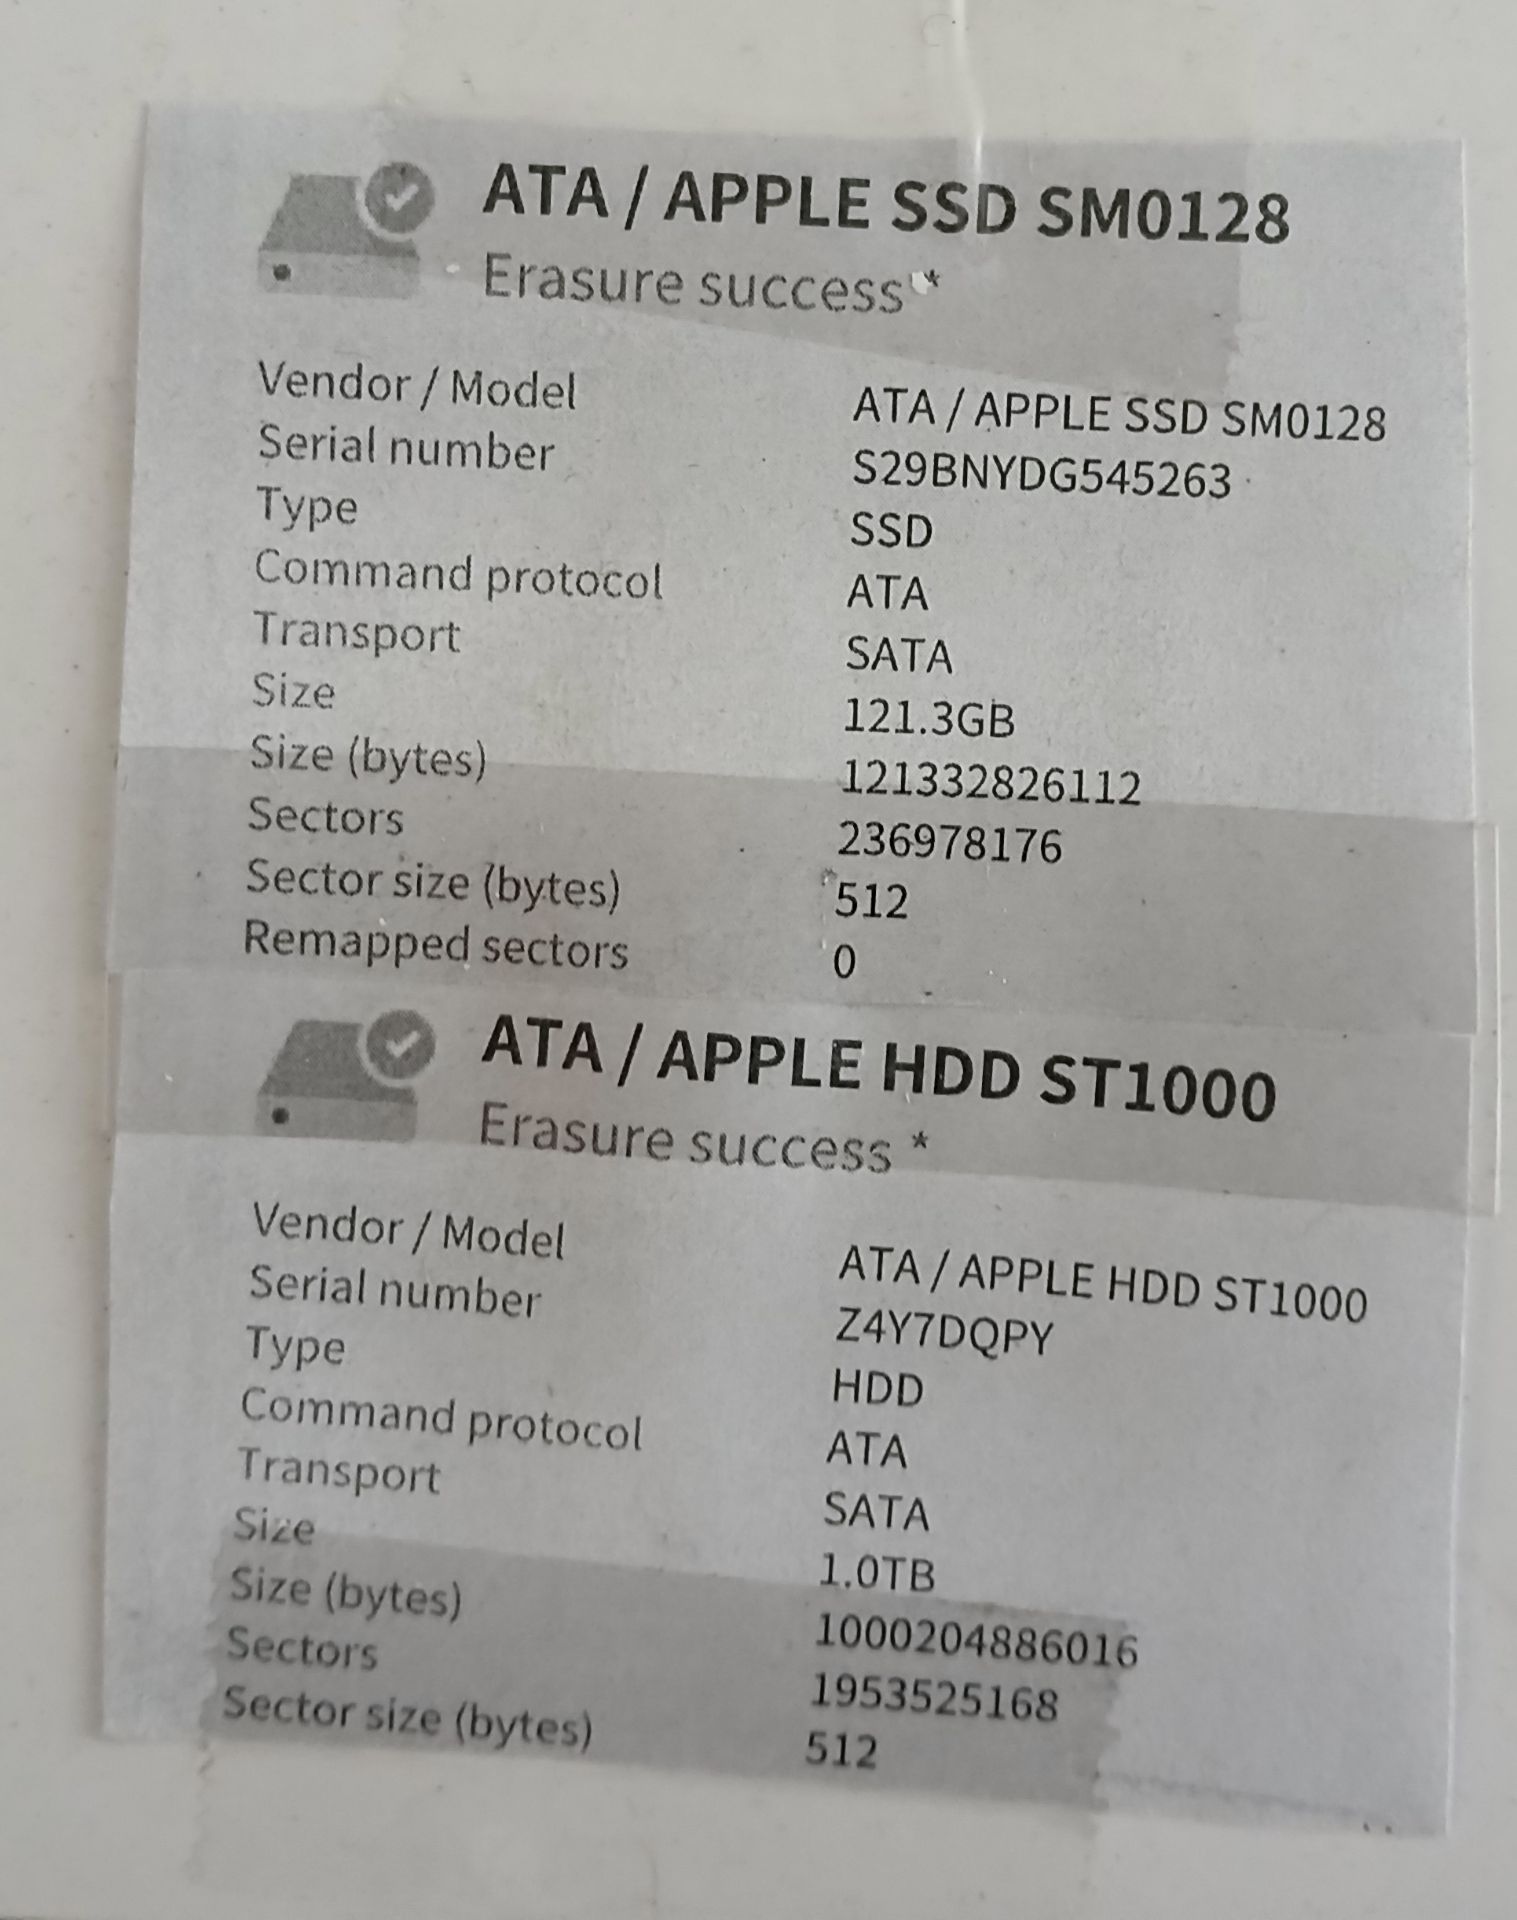 Apple iMac (Retina 5K, 27”, Mid 2015), Serial Number DGKQ306WFY13, with keyboard (No Mouse or - Image 7 of 14